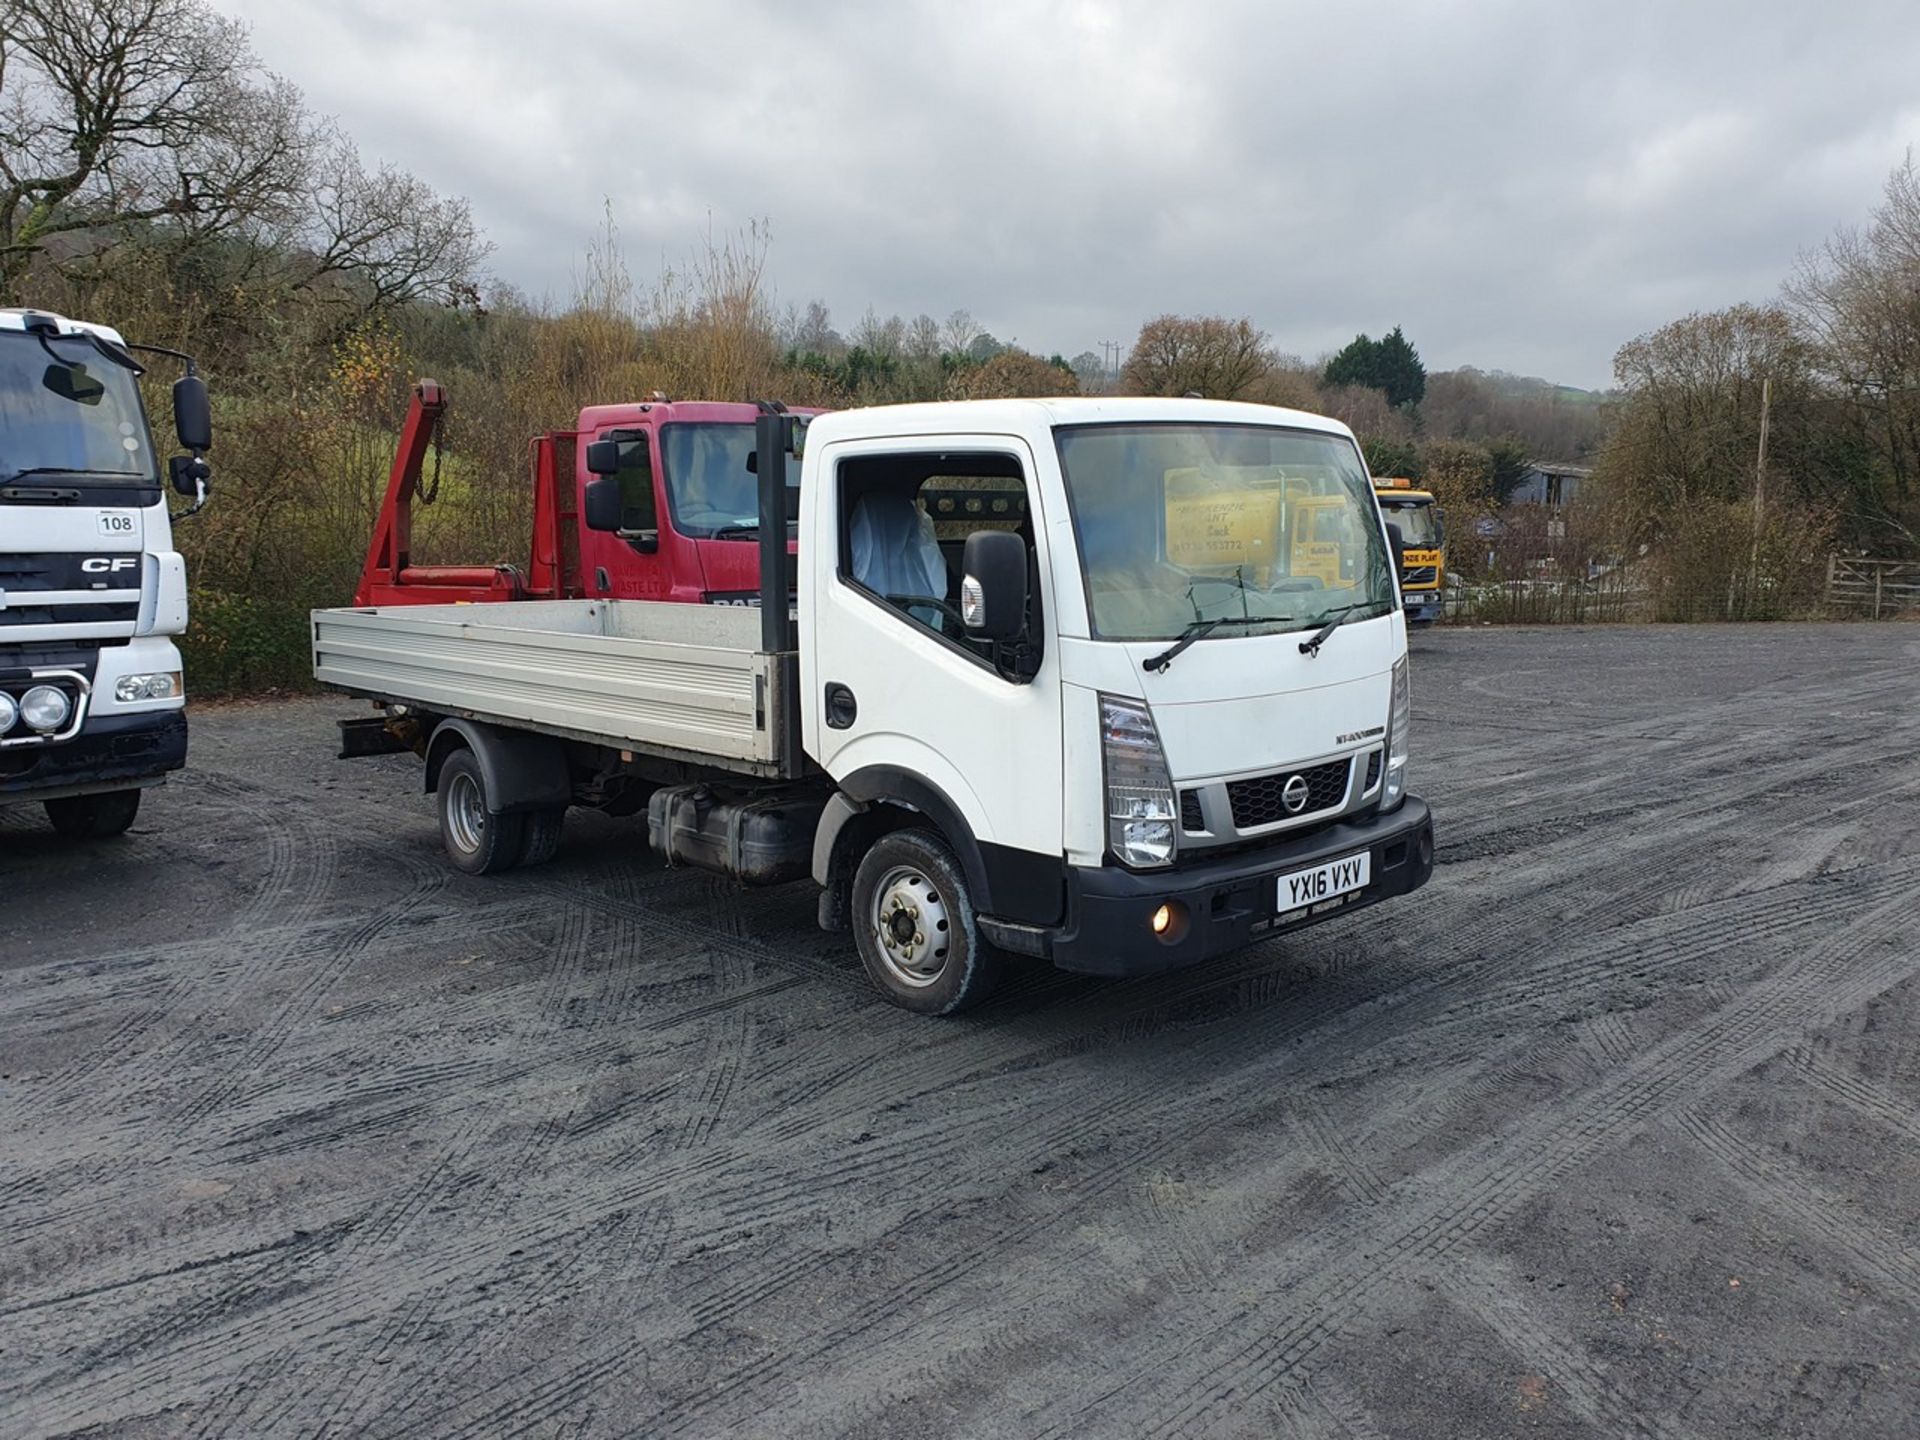 16/16 NISSAN NT400 CABSTAR 35.14 LWB D - 2488cc 2dr Flat Bed (White) - Image 17 of 33